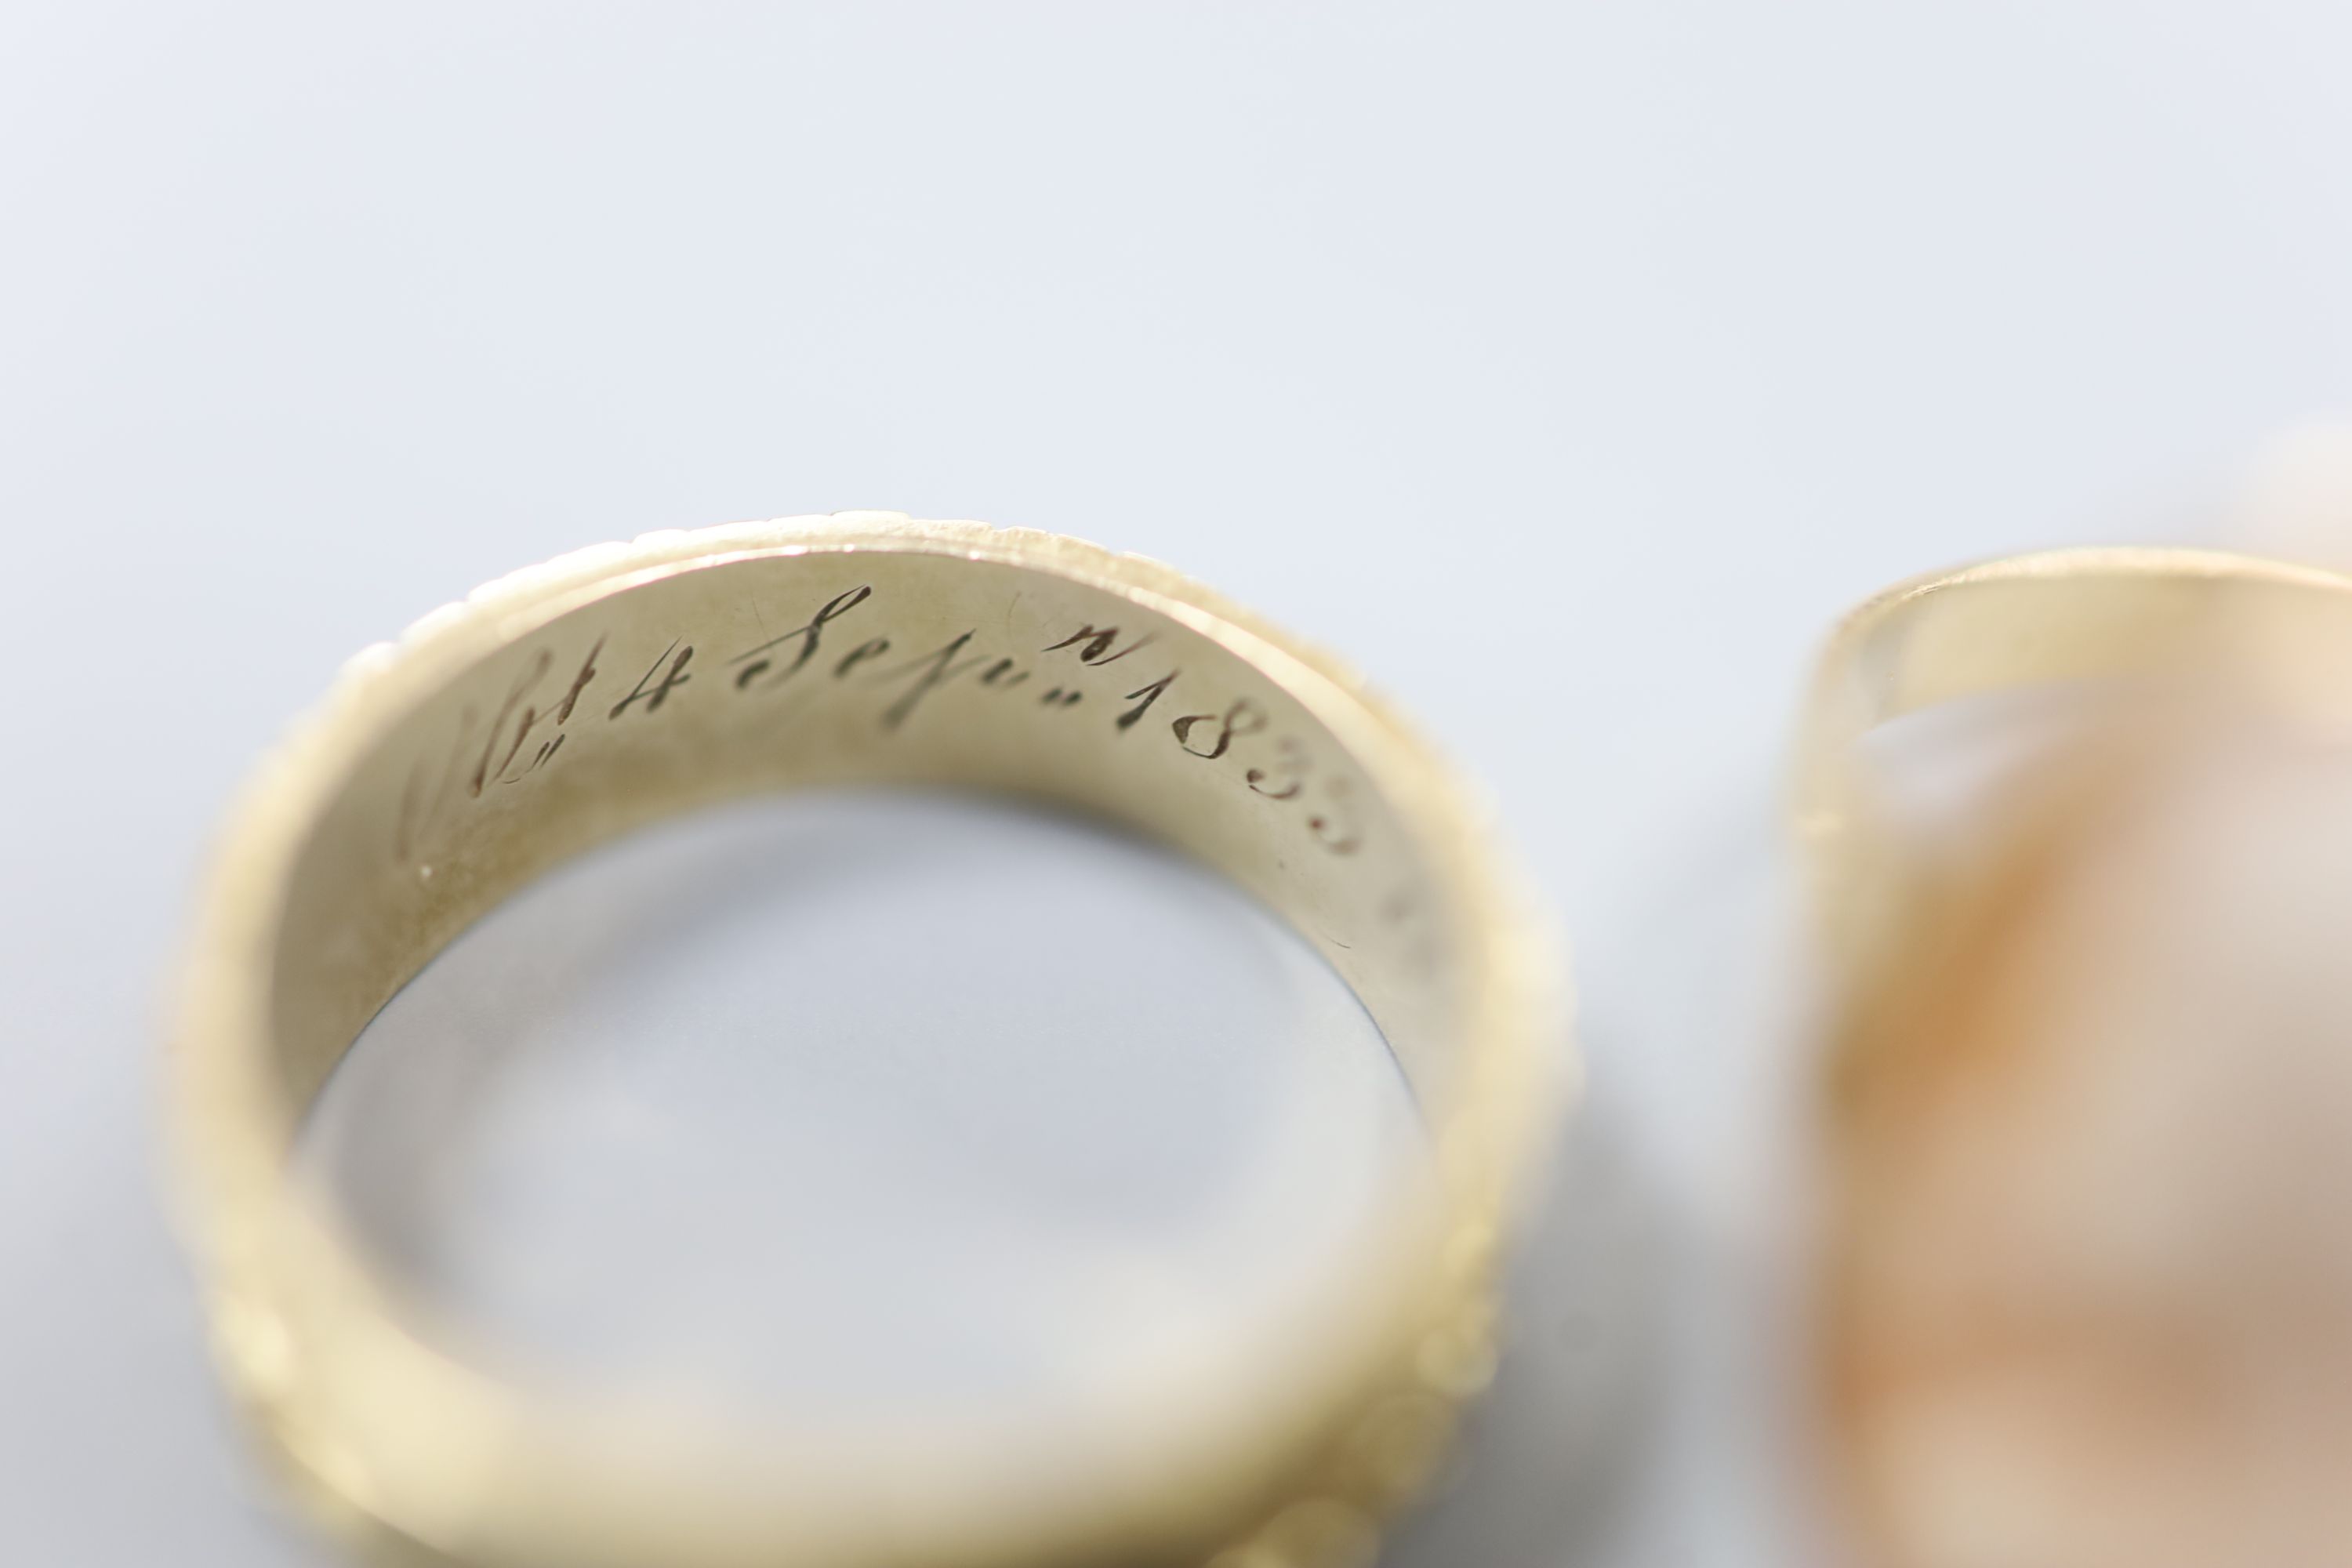 A William IV yellow metal mourning ring (lacking black enamel), with engraved initial and inscription, size M, 2.2 grams and a modern 14k and oval cameo shell ring, gross 3.2 grams.